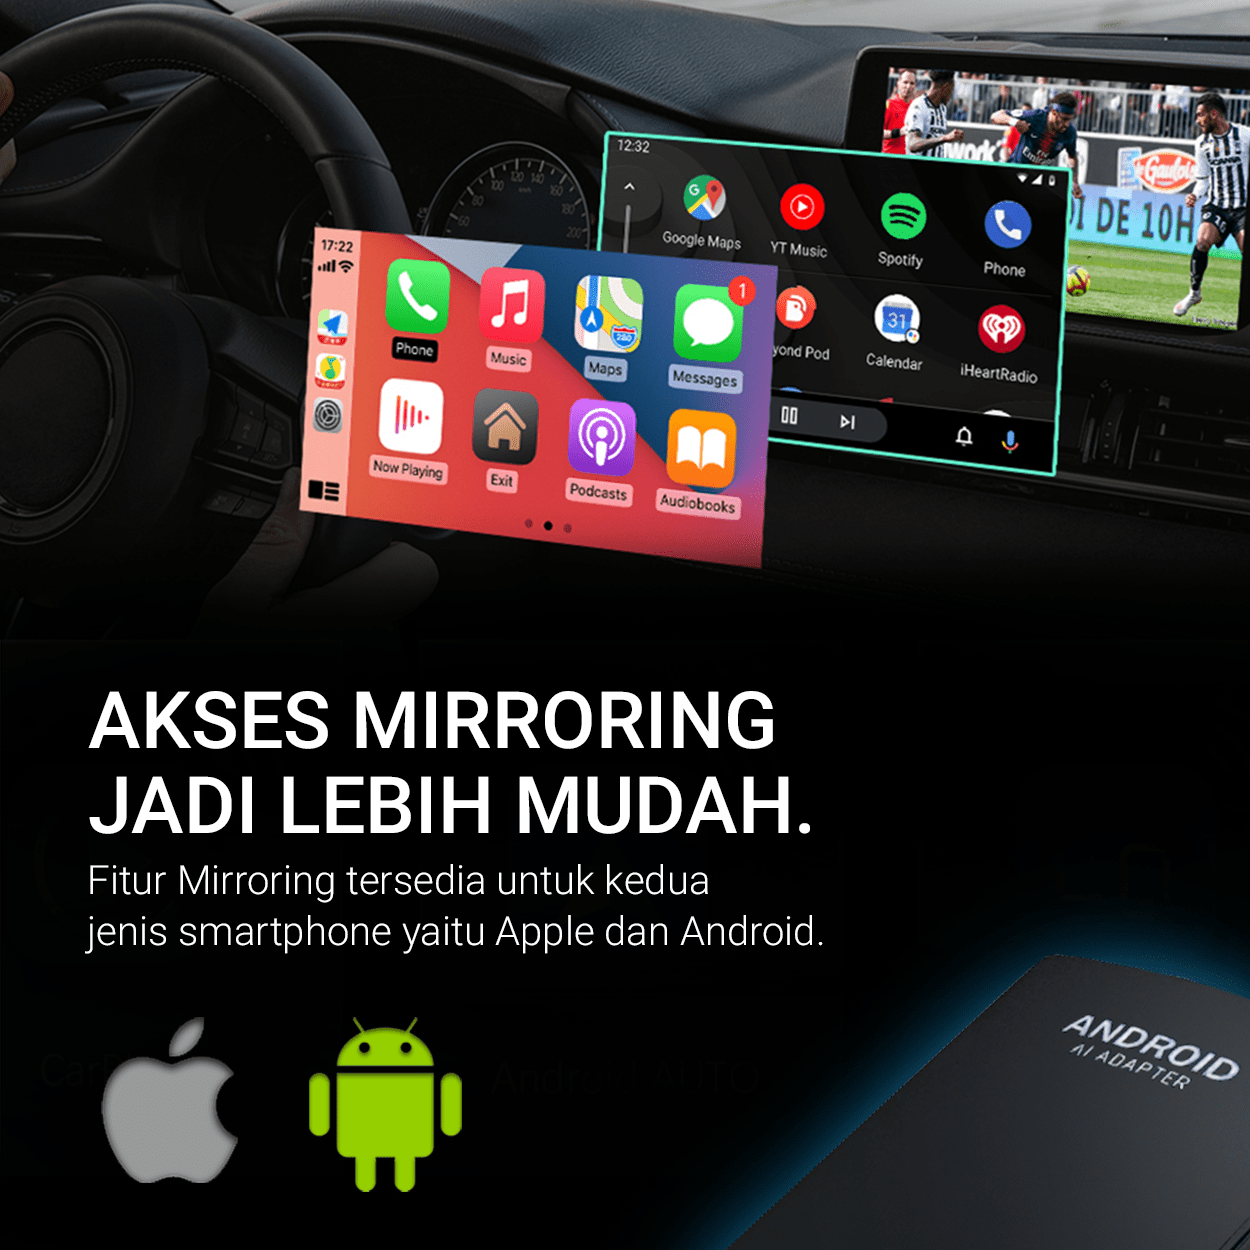 Modul Headunit Mobil | Smart Android Interface